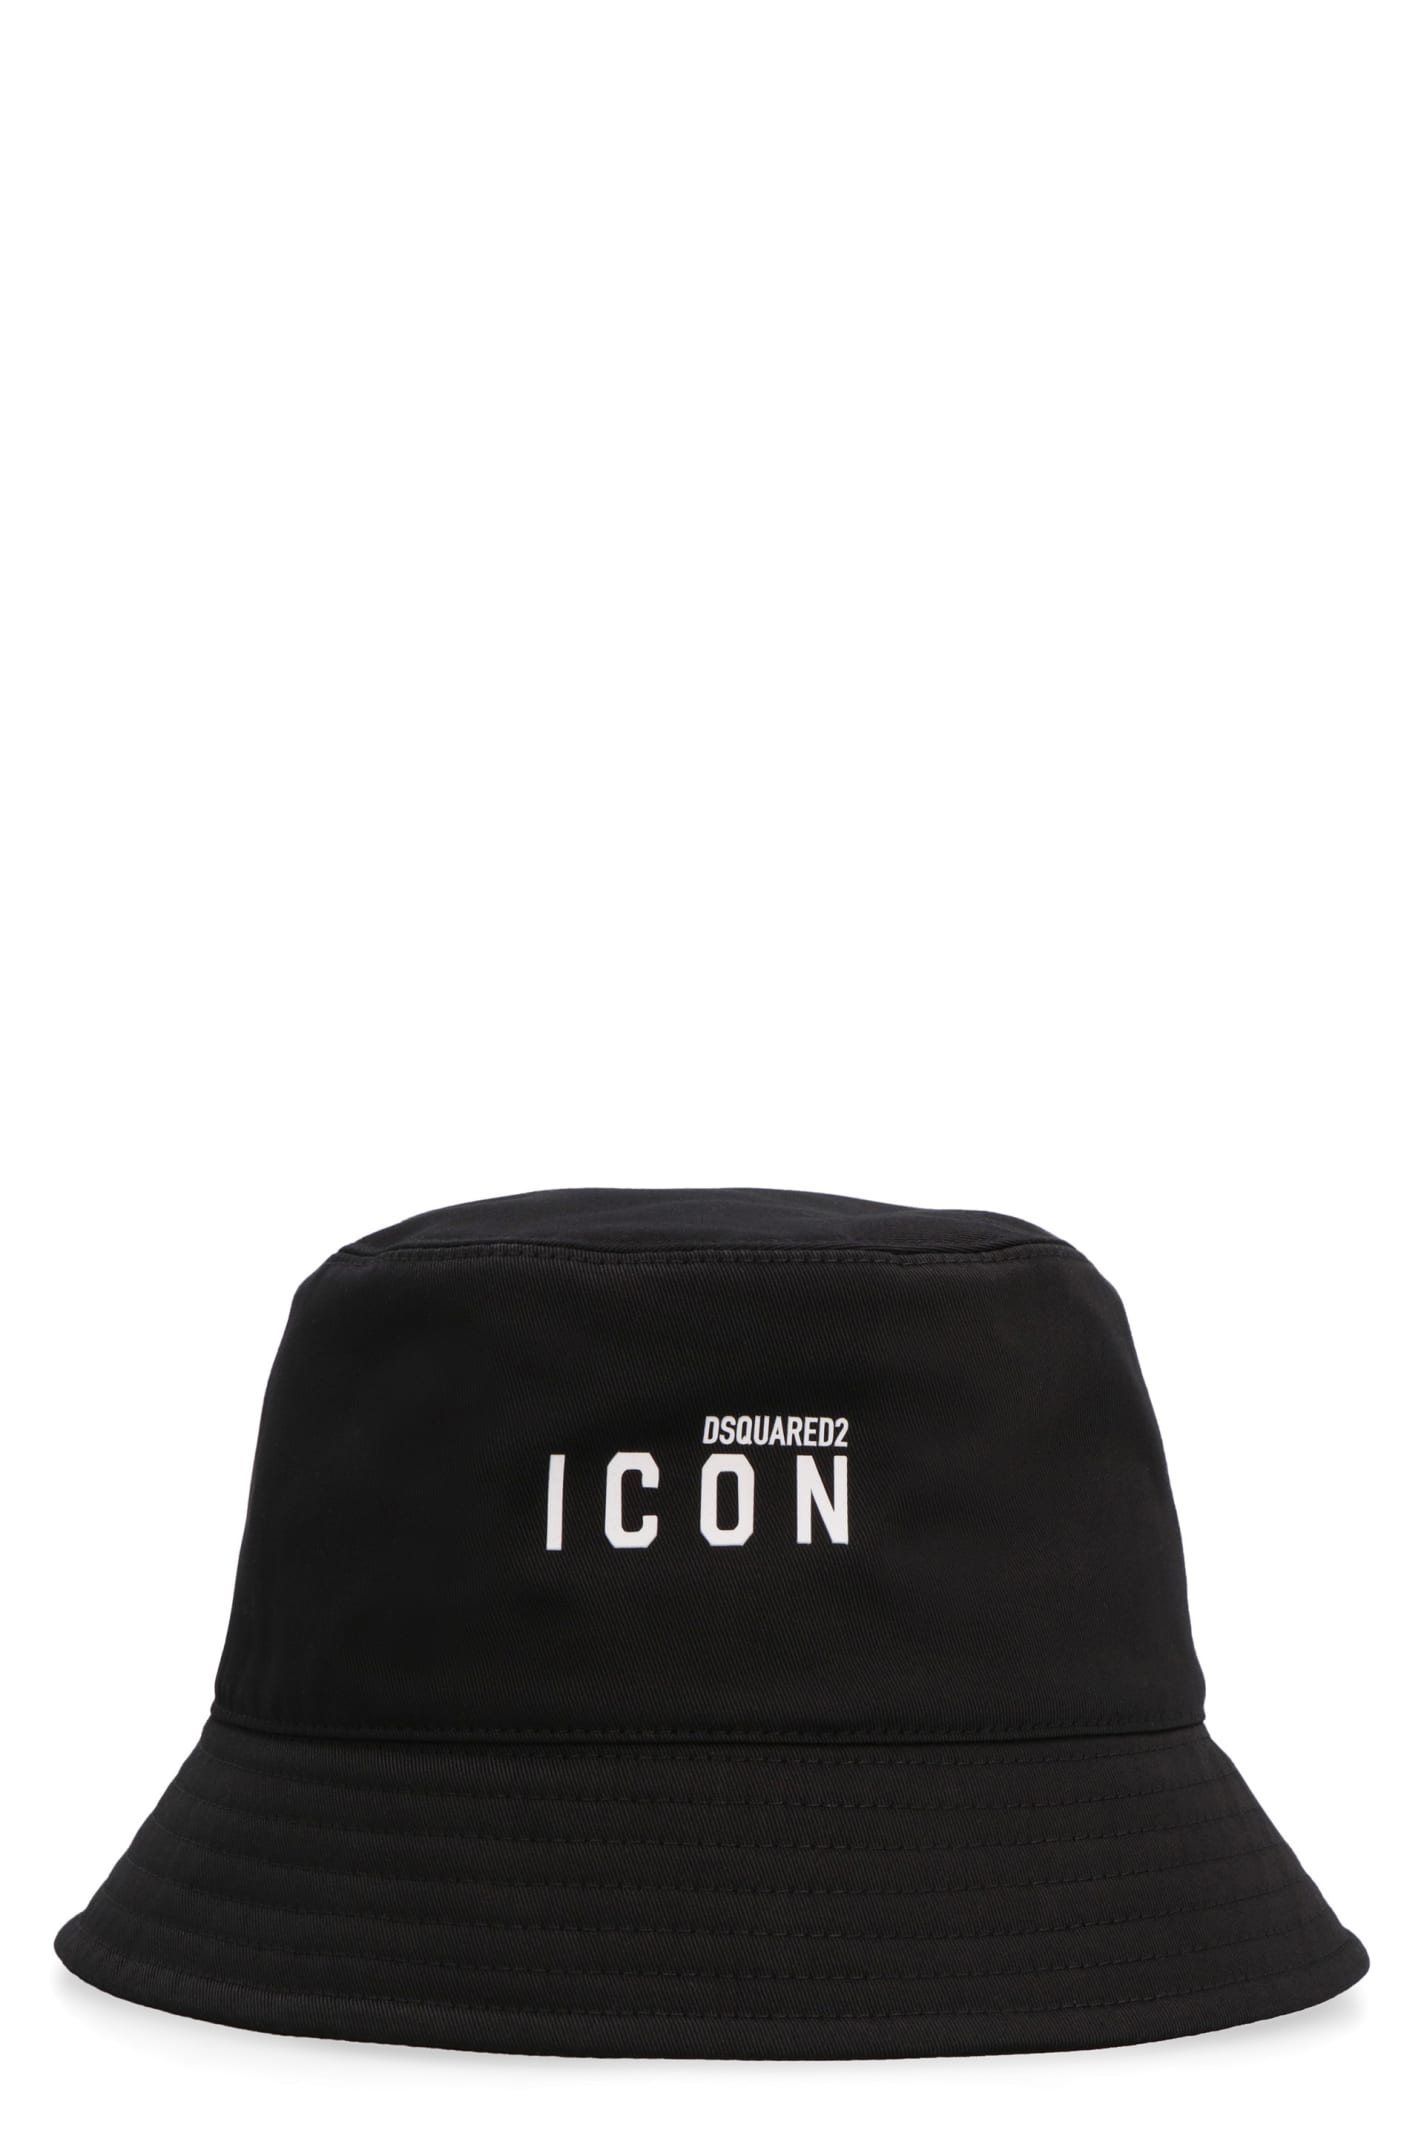 Dsquared2 Be Icon Bucket Hat